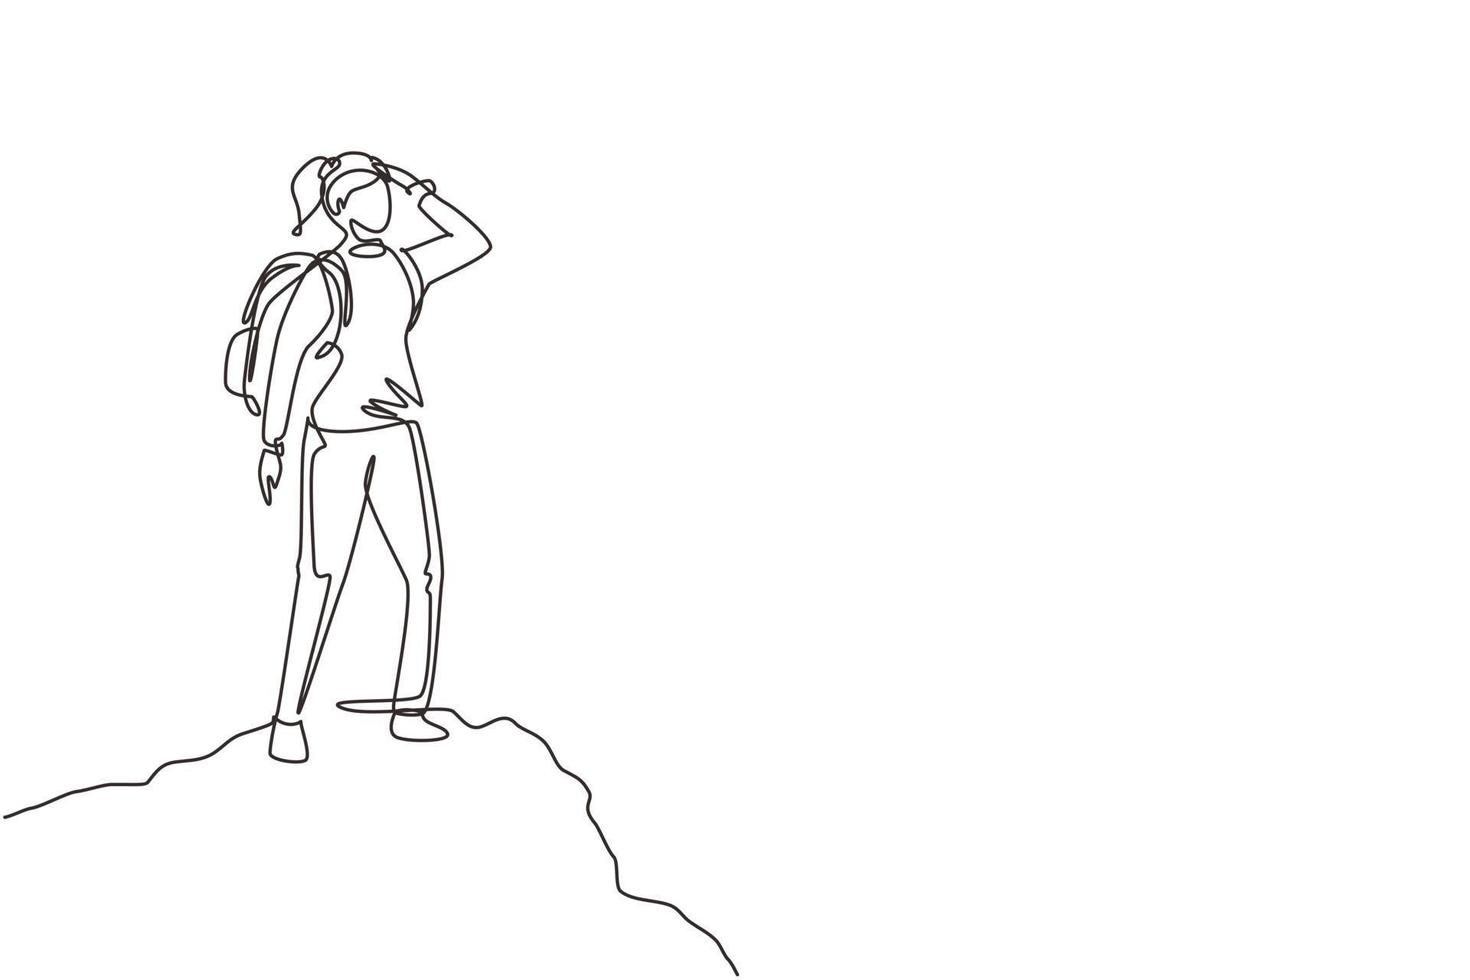 Single one line drawing woman hiker at top of mountain looking into distance. Adventure in mountainous terrain. Hiking, adventure tourism, travel. Continuous line draw design vector illustration